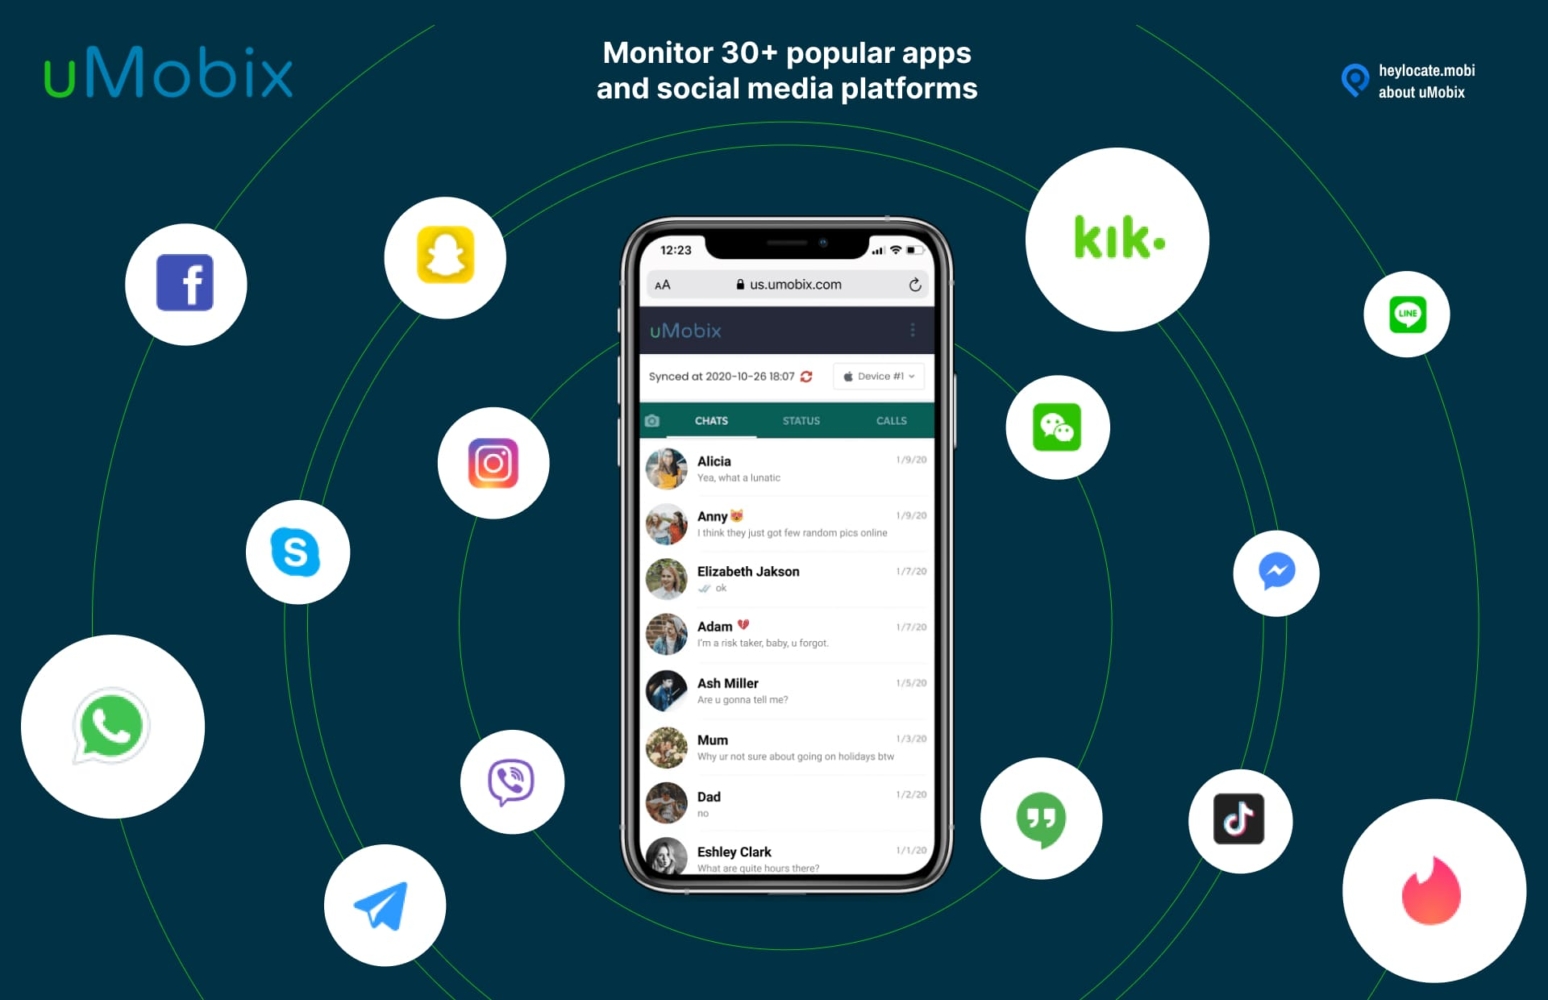 An illustrative image showcasing the uMobix application's capability to monitor over 30 popular social media and messaging apps. In the center is a smartphone displaying the uMobix interface with a list of chat conversations from different contacts. Surrounding the phone are icons representing various apps such as Facebook, Snapchat, Instagram, WhatsApp, and more, all connected with curved lines to the central phone image, symbolizing the app's comprehensive tracking features across multiple platforms.